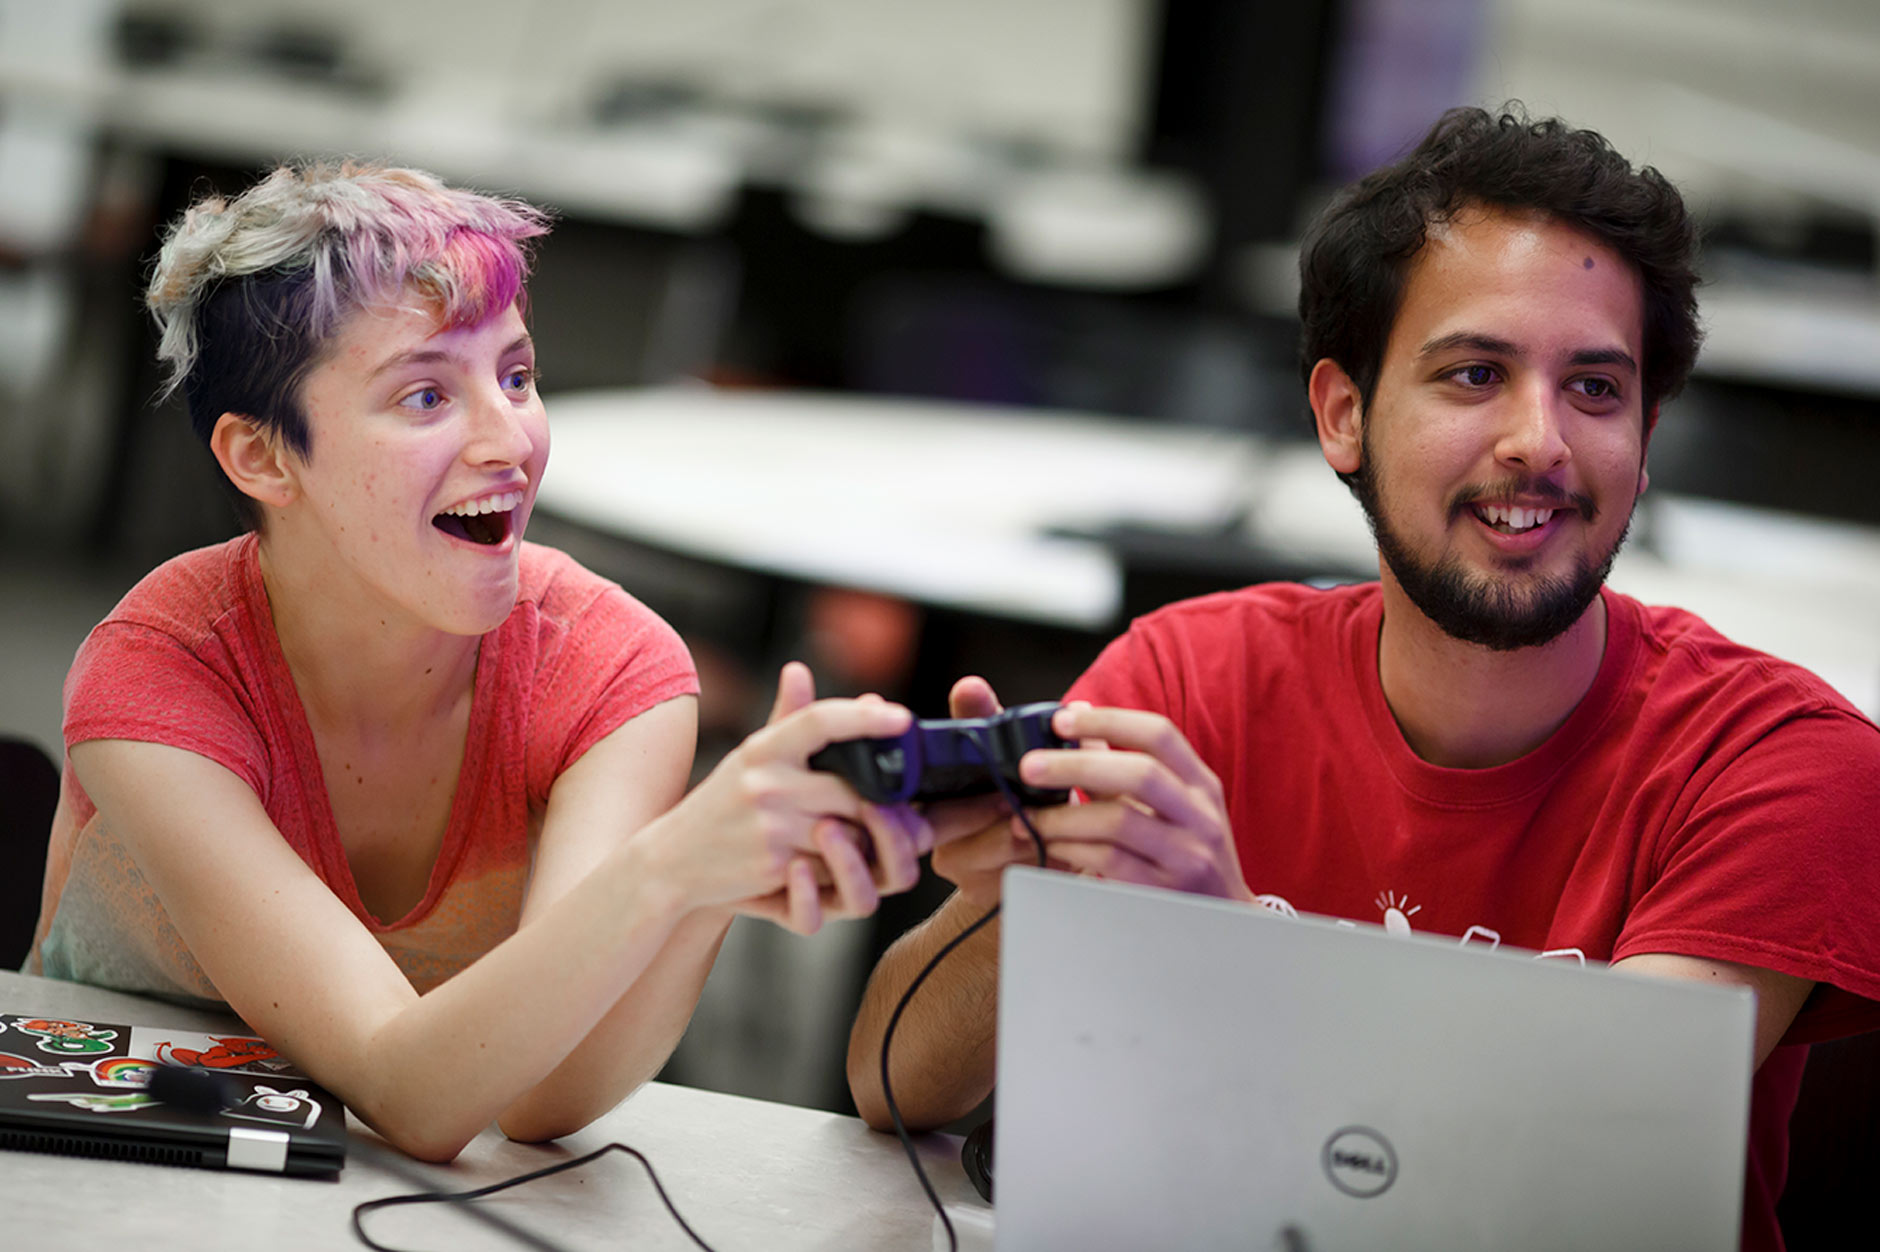 Gamedev@IU Kickoff Jam in the Student Building on Friday, Aug. 31, 2018.